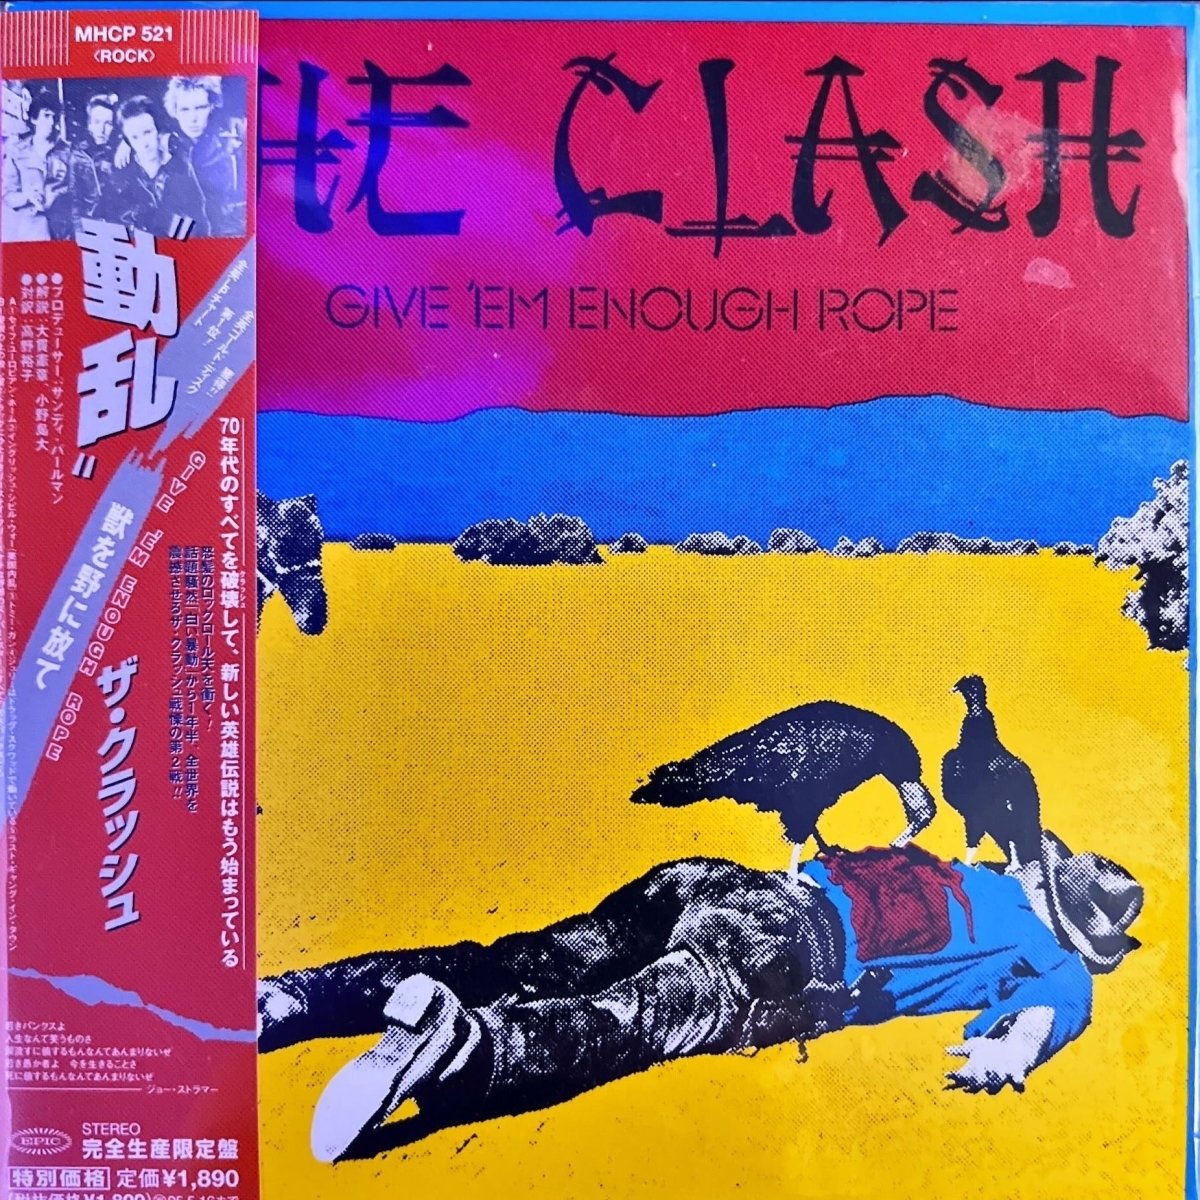 The Clash - Give 'Em Enough Rope Music CDs Vinyl